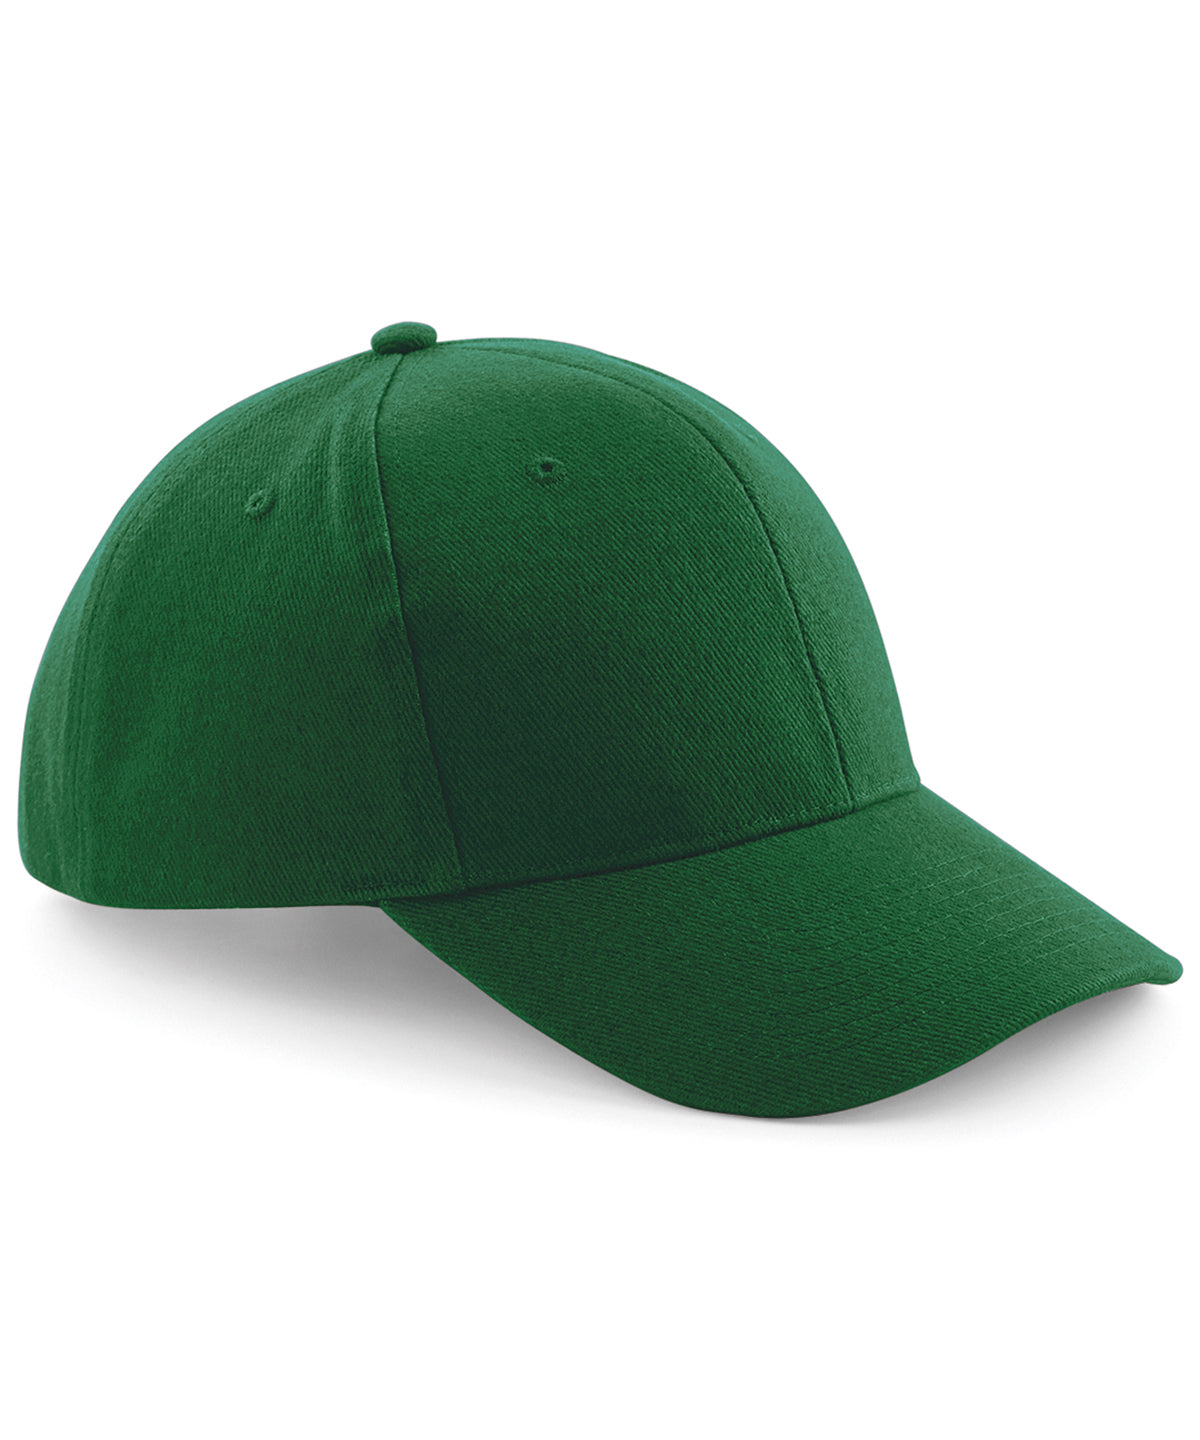 Personalised Caps - Dark Green Beechfield Pro-style heavy brushed cotton cap